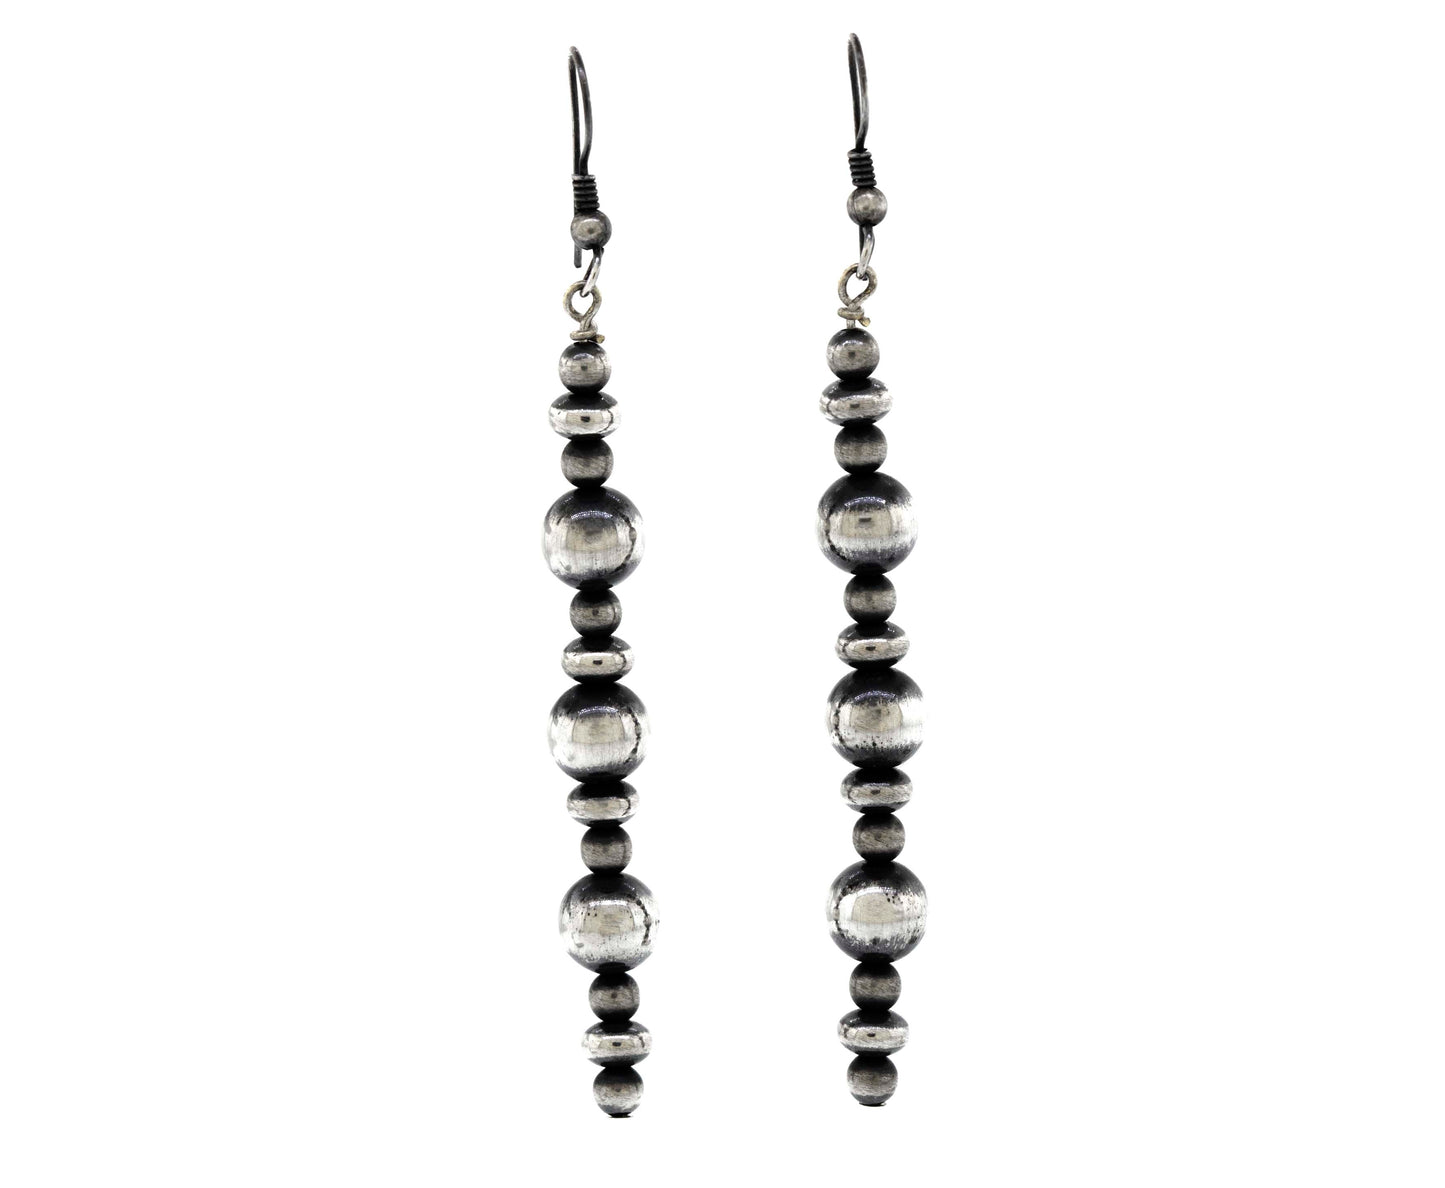 A pair of Long Handcrafted Navajo Pearl earrings from Super Silver with an oxidized finish on a white background.